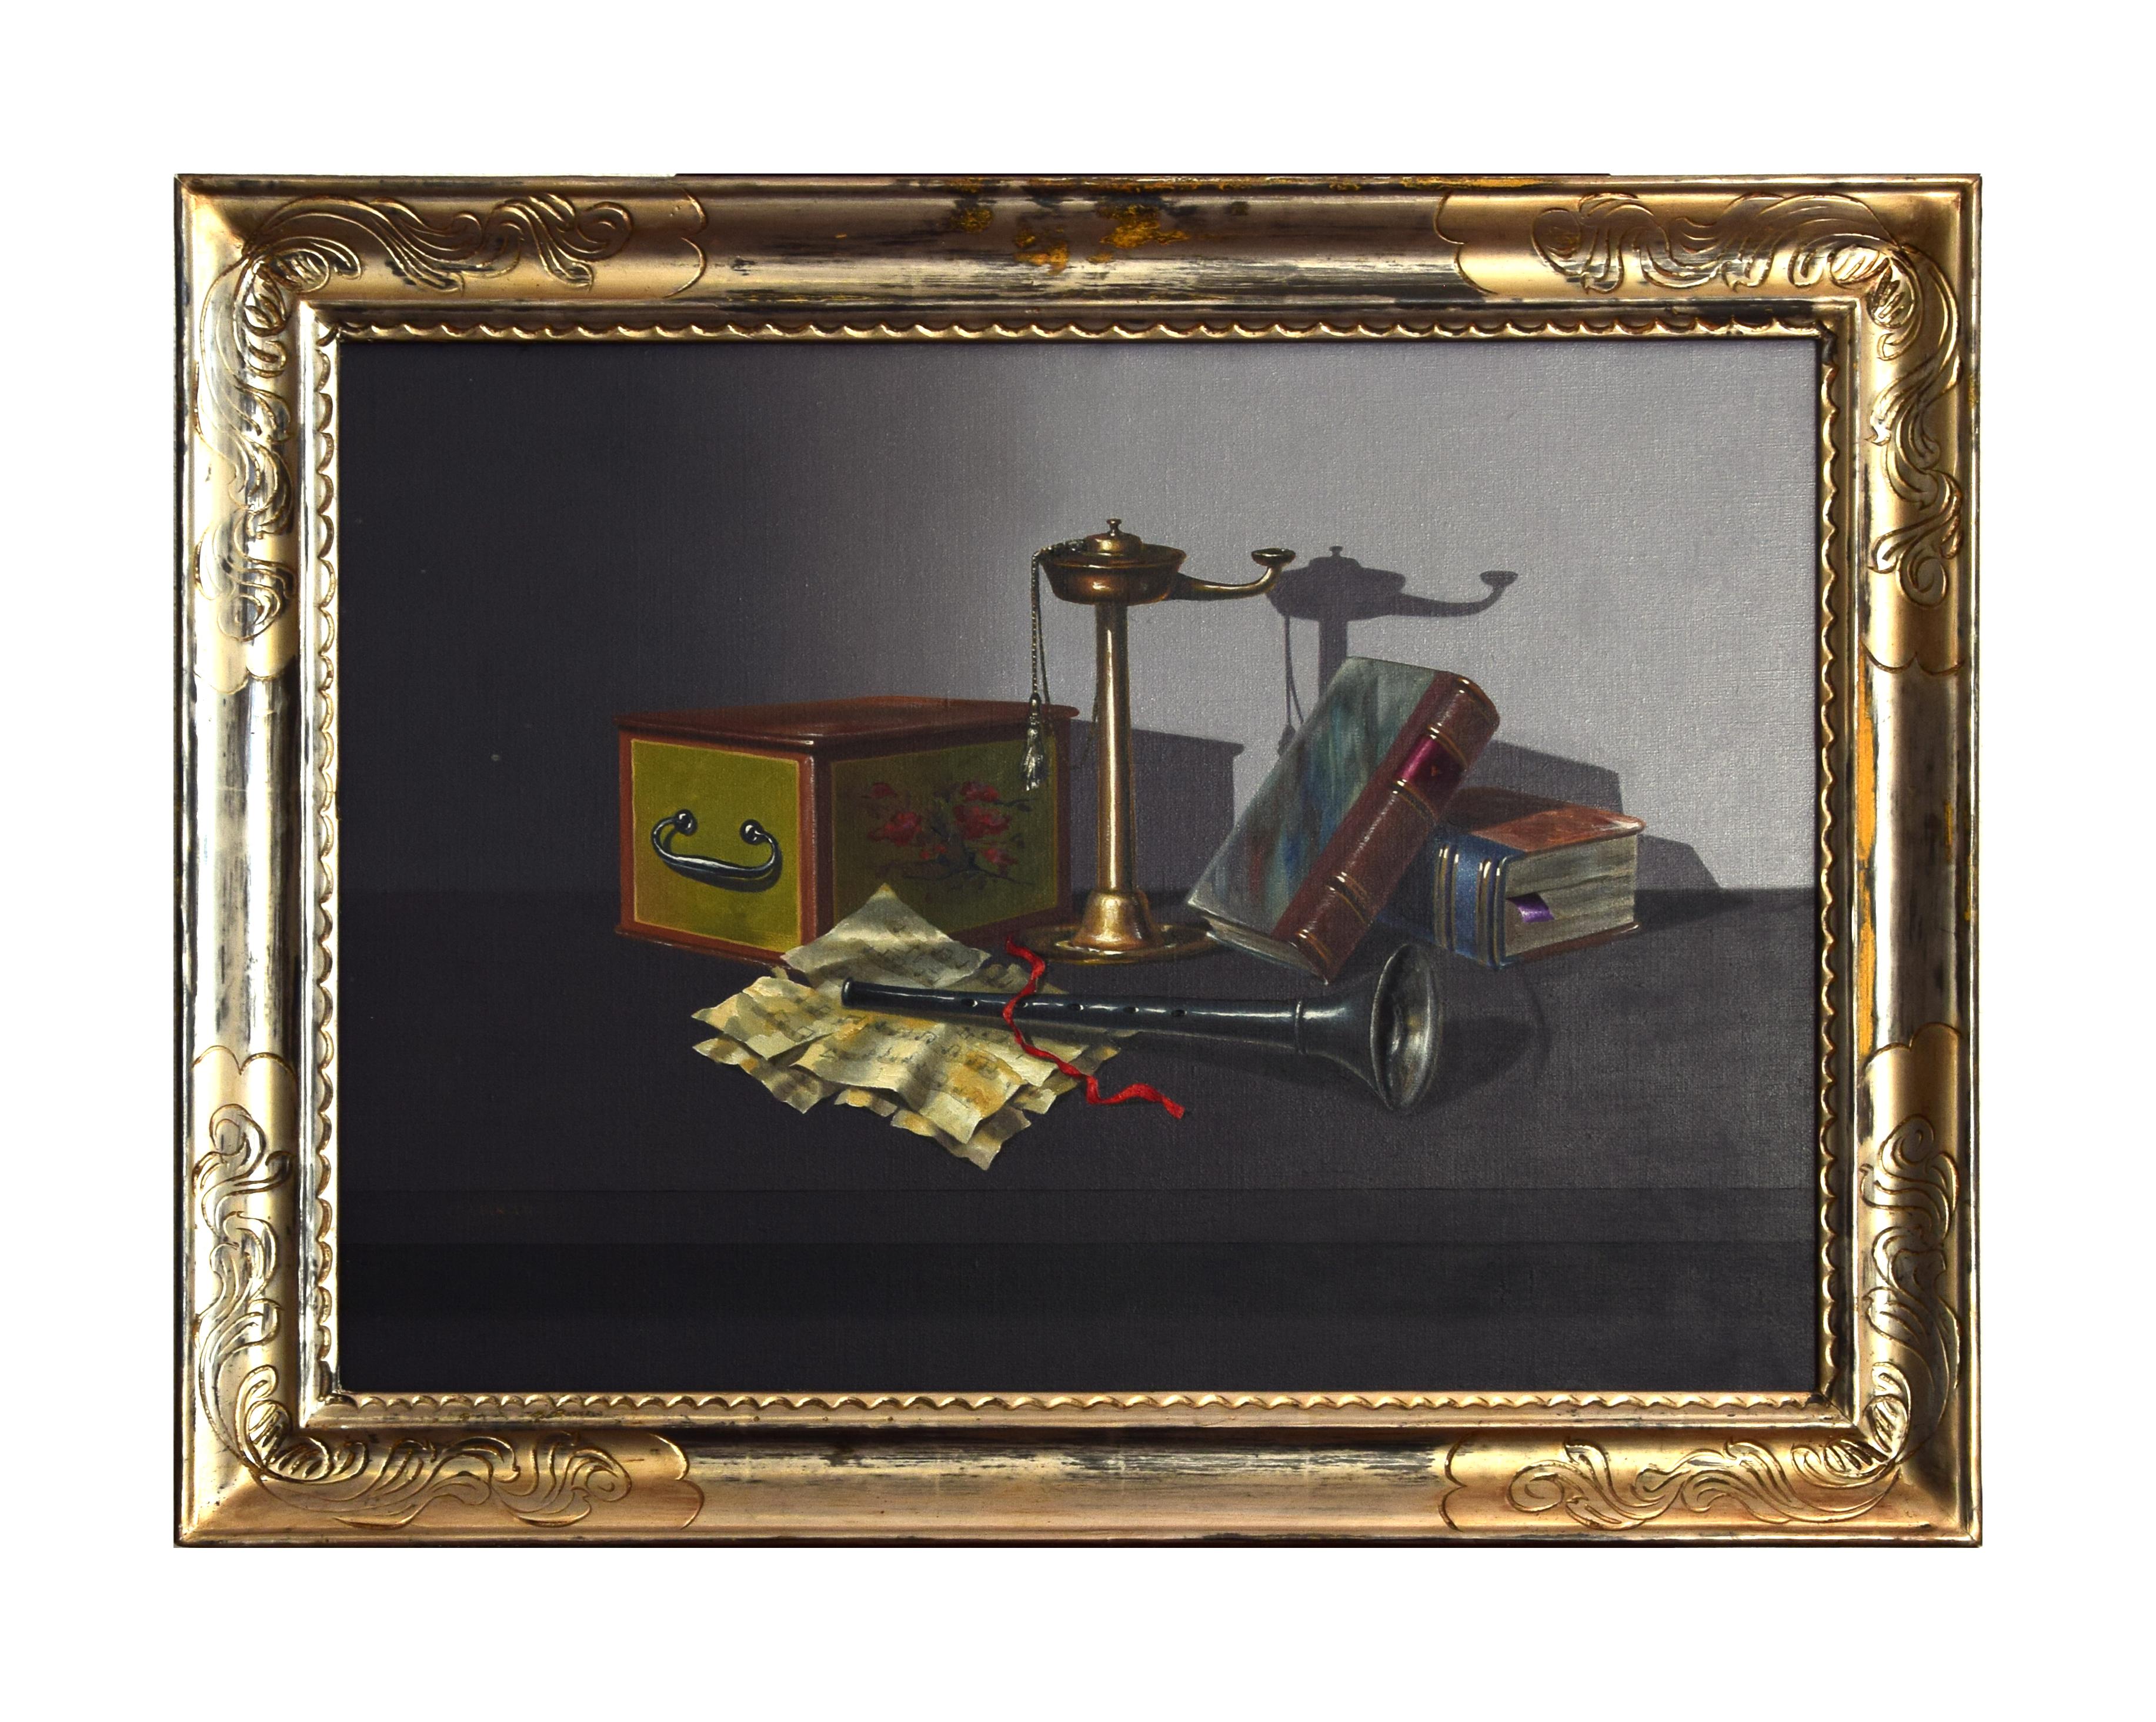 Unknown Figurative Painting - Still Life with Objects - 1970s - Oil on Canvas - Modern